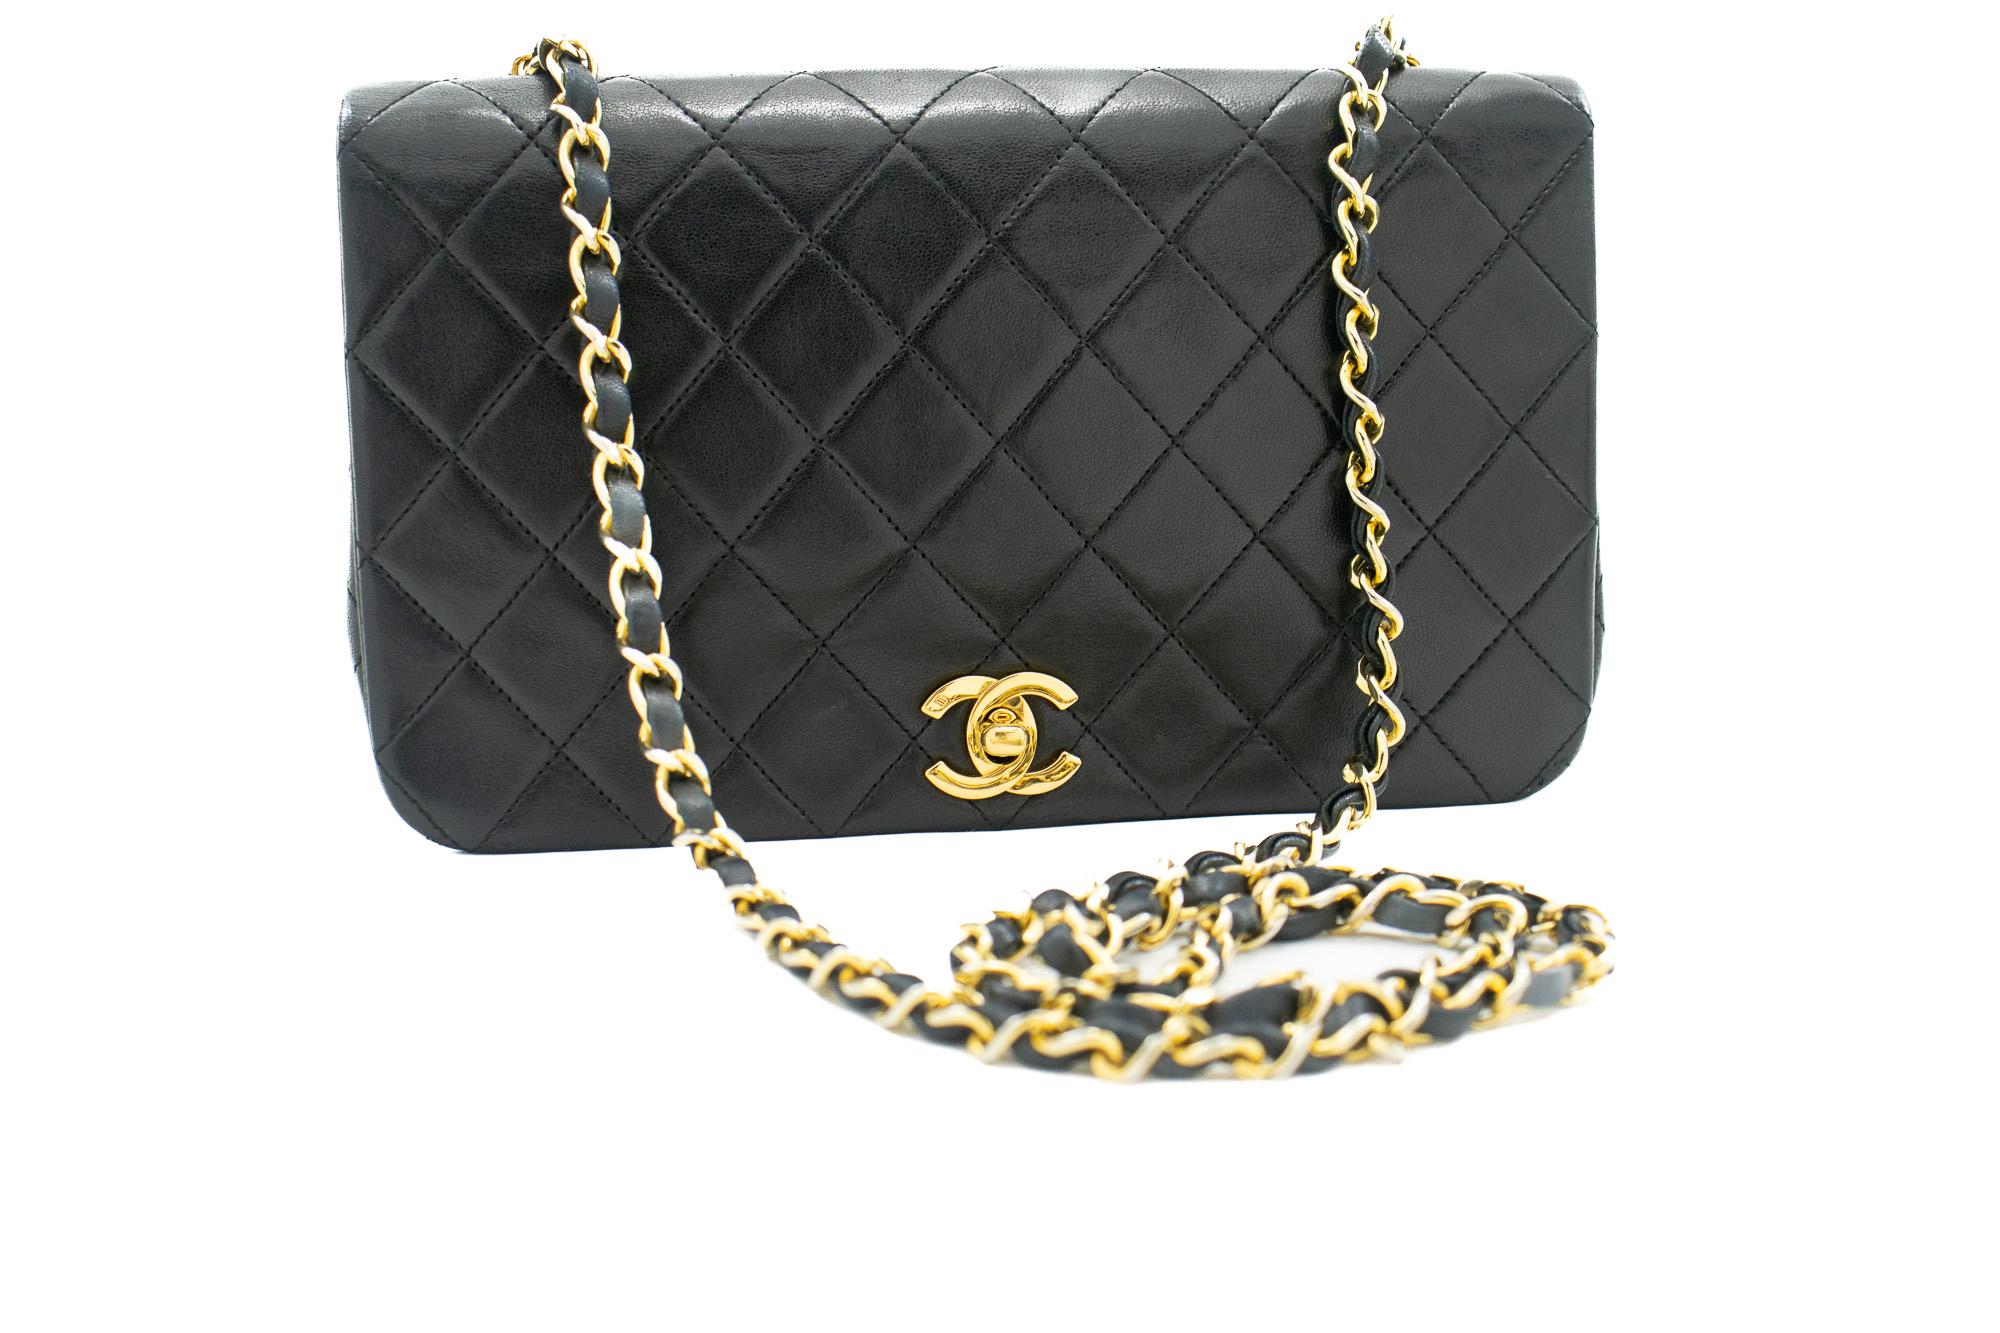 An authentic CHANEL Full Flap Chain Shoulder Bag Black Quilted made of black Lambskin Purse. The color is Black. The outside material is Leather. The pattern is Solid. This item is Vintage / Classic. The year of manufacture would be